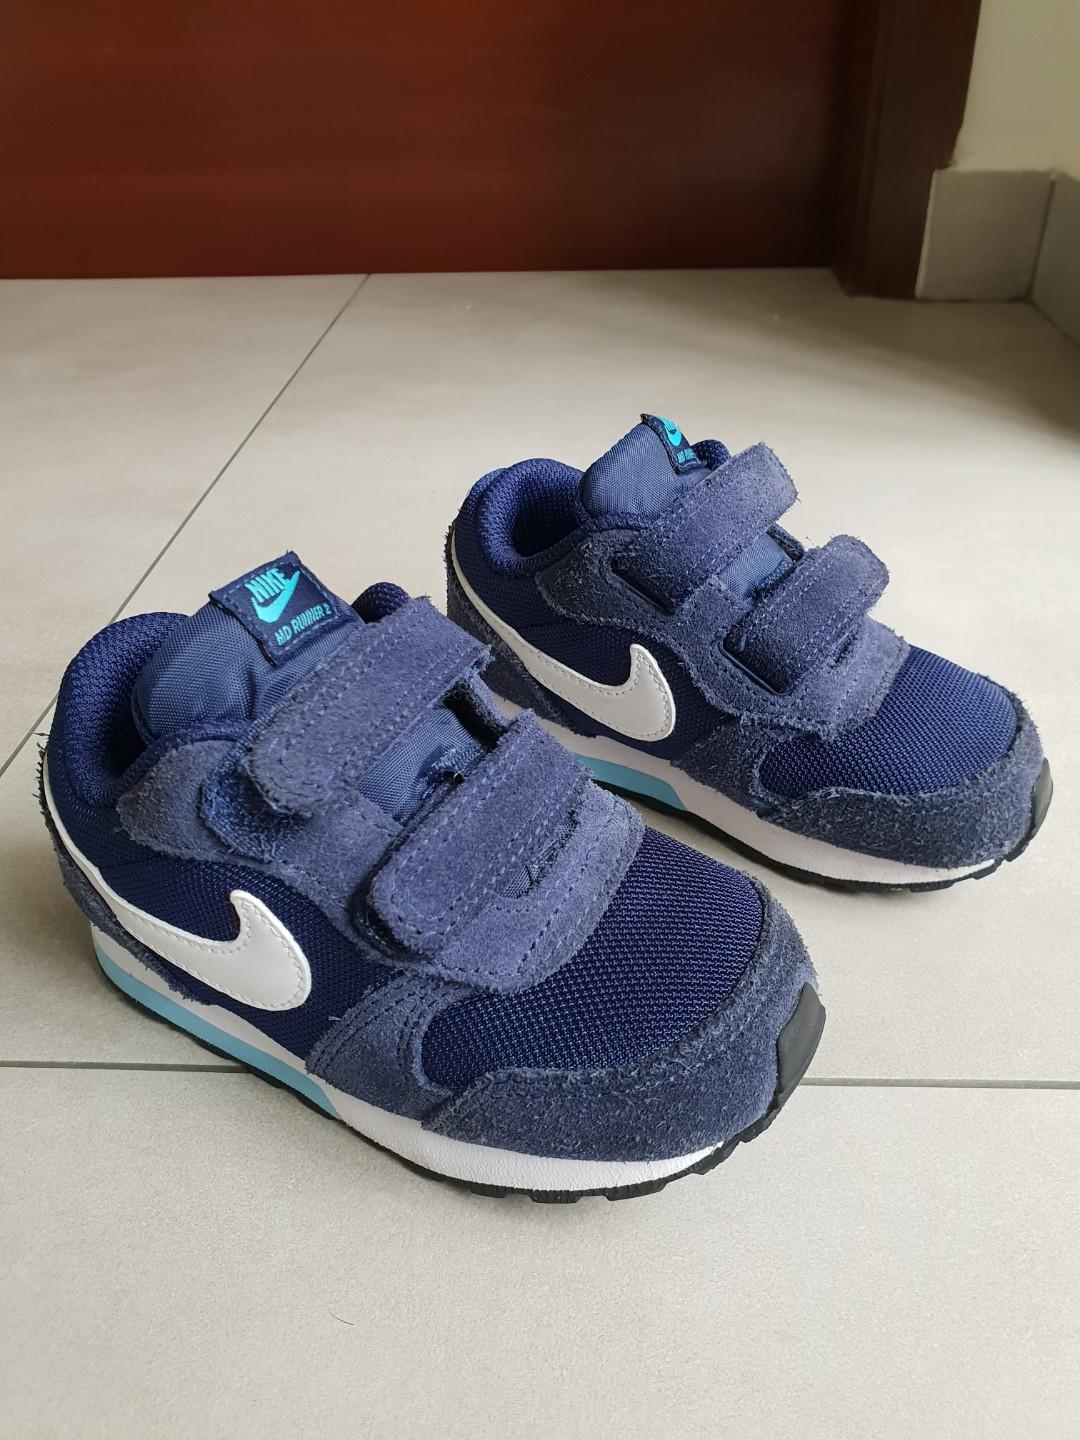 nike shoes for 2 years old boy